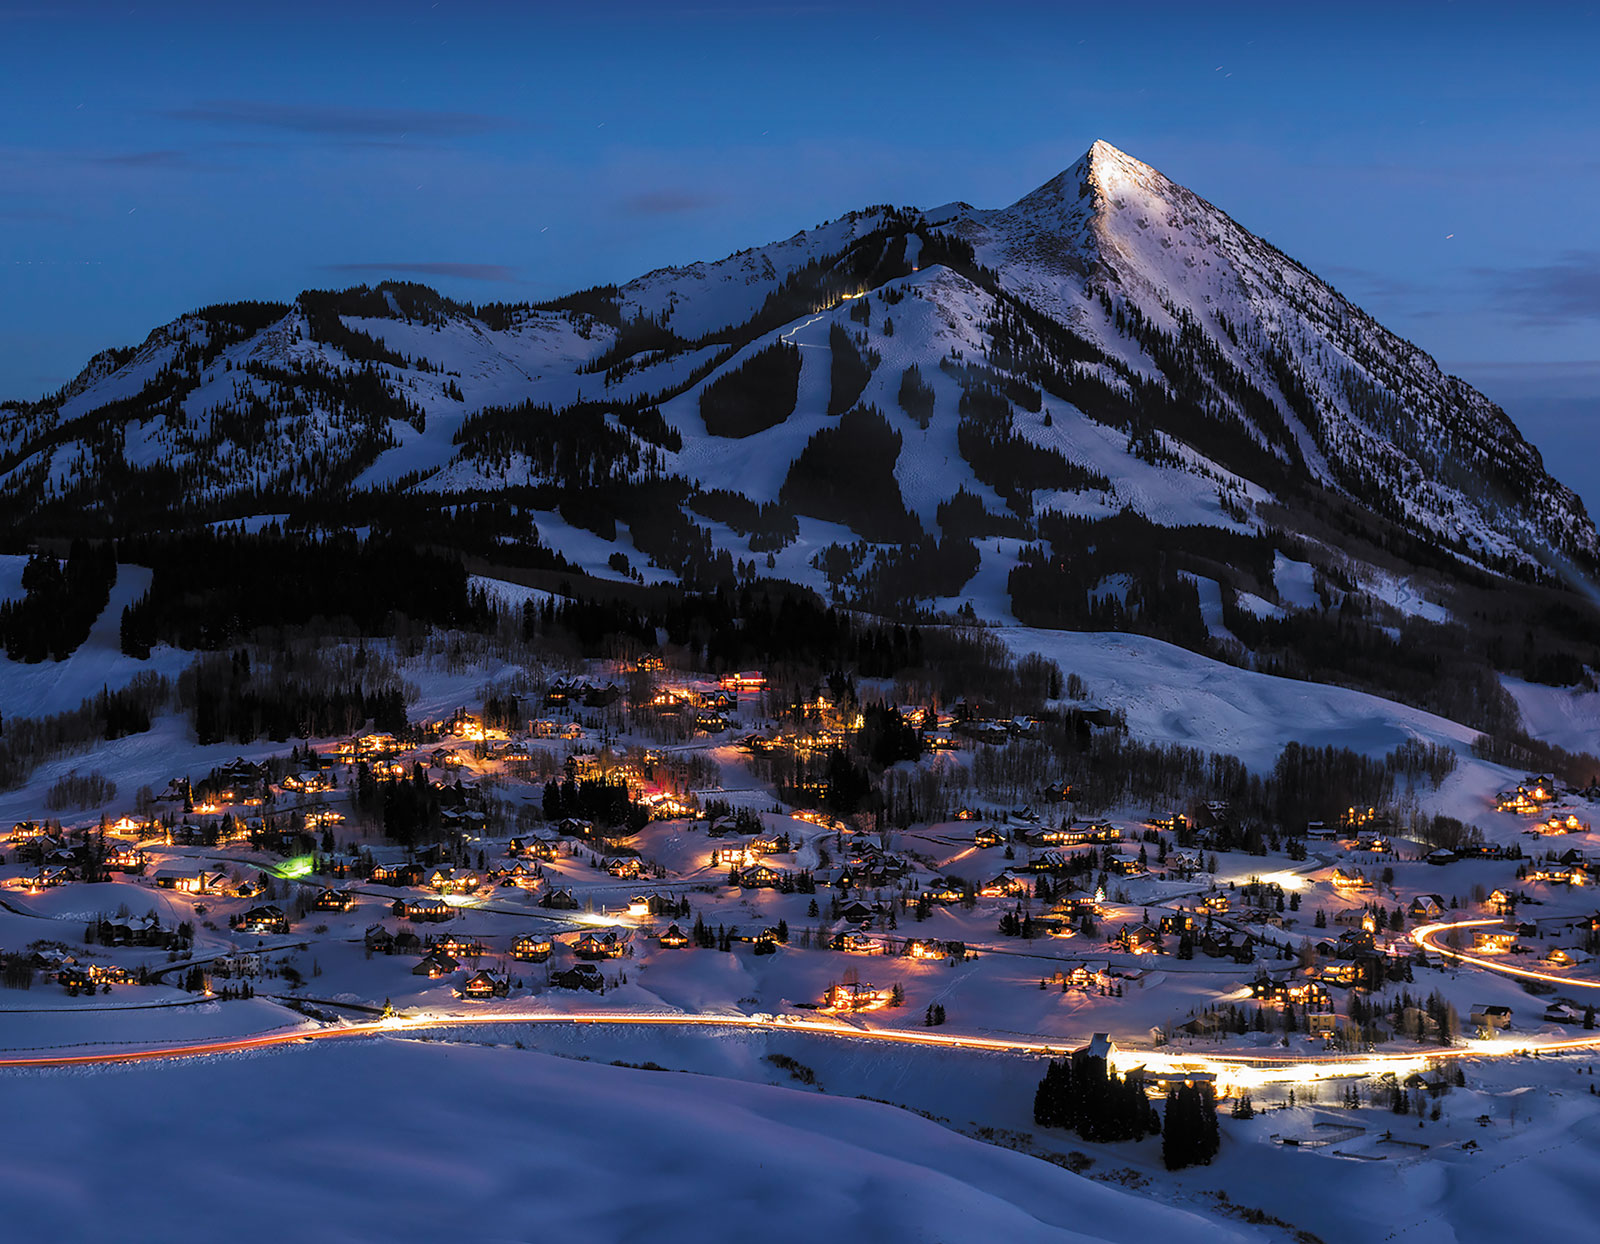 An aerial view of Crested Butte, Colorado